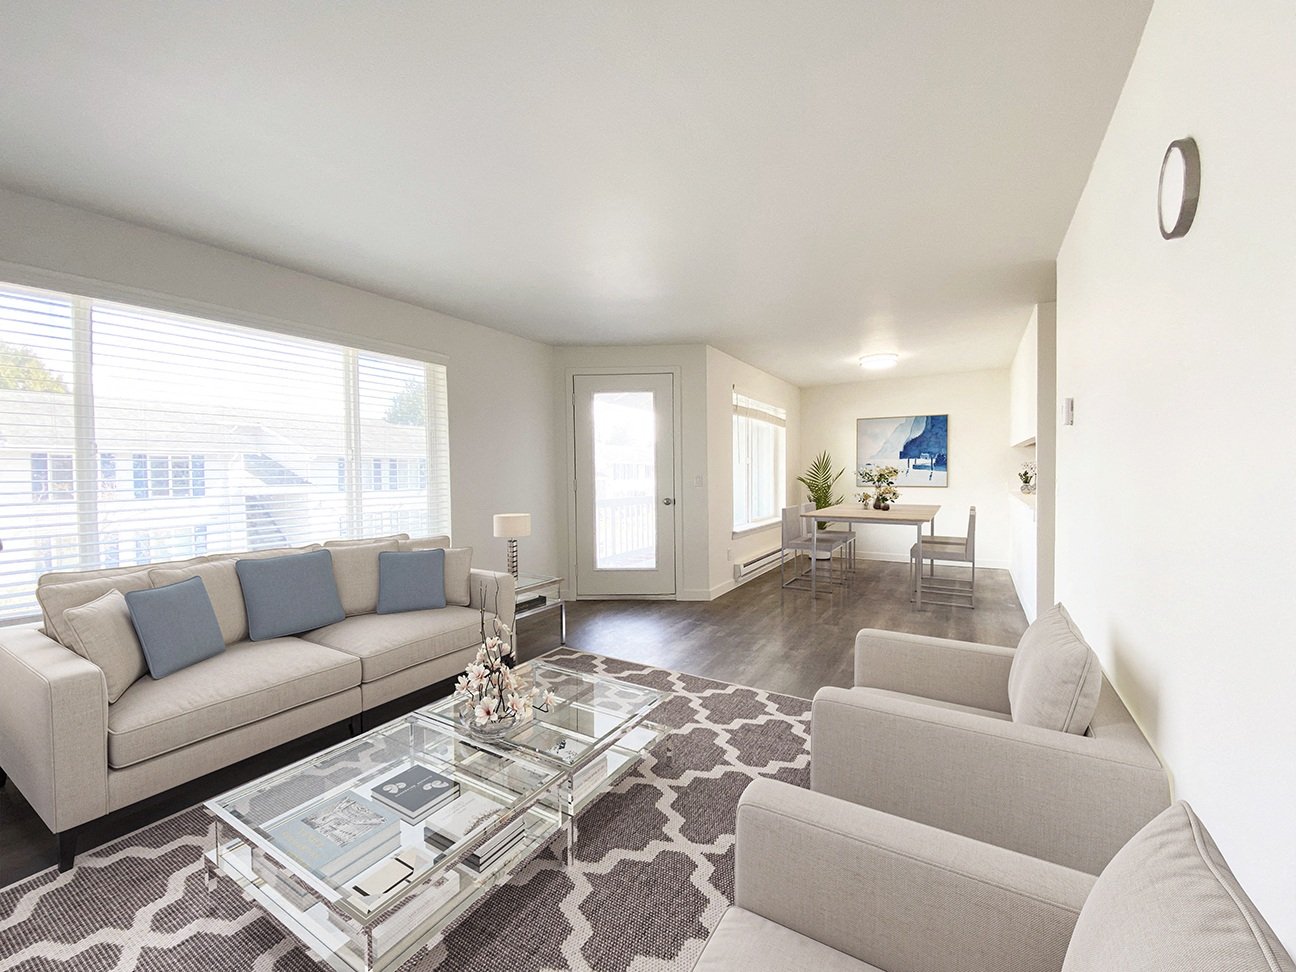 Bright spacious living room with three huge windows, a door to the private balcony and the dining room past the door. Staged with a couch, coffee table, 2 chairs and a rug.